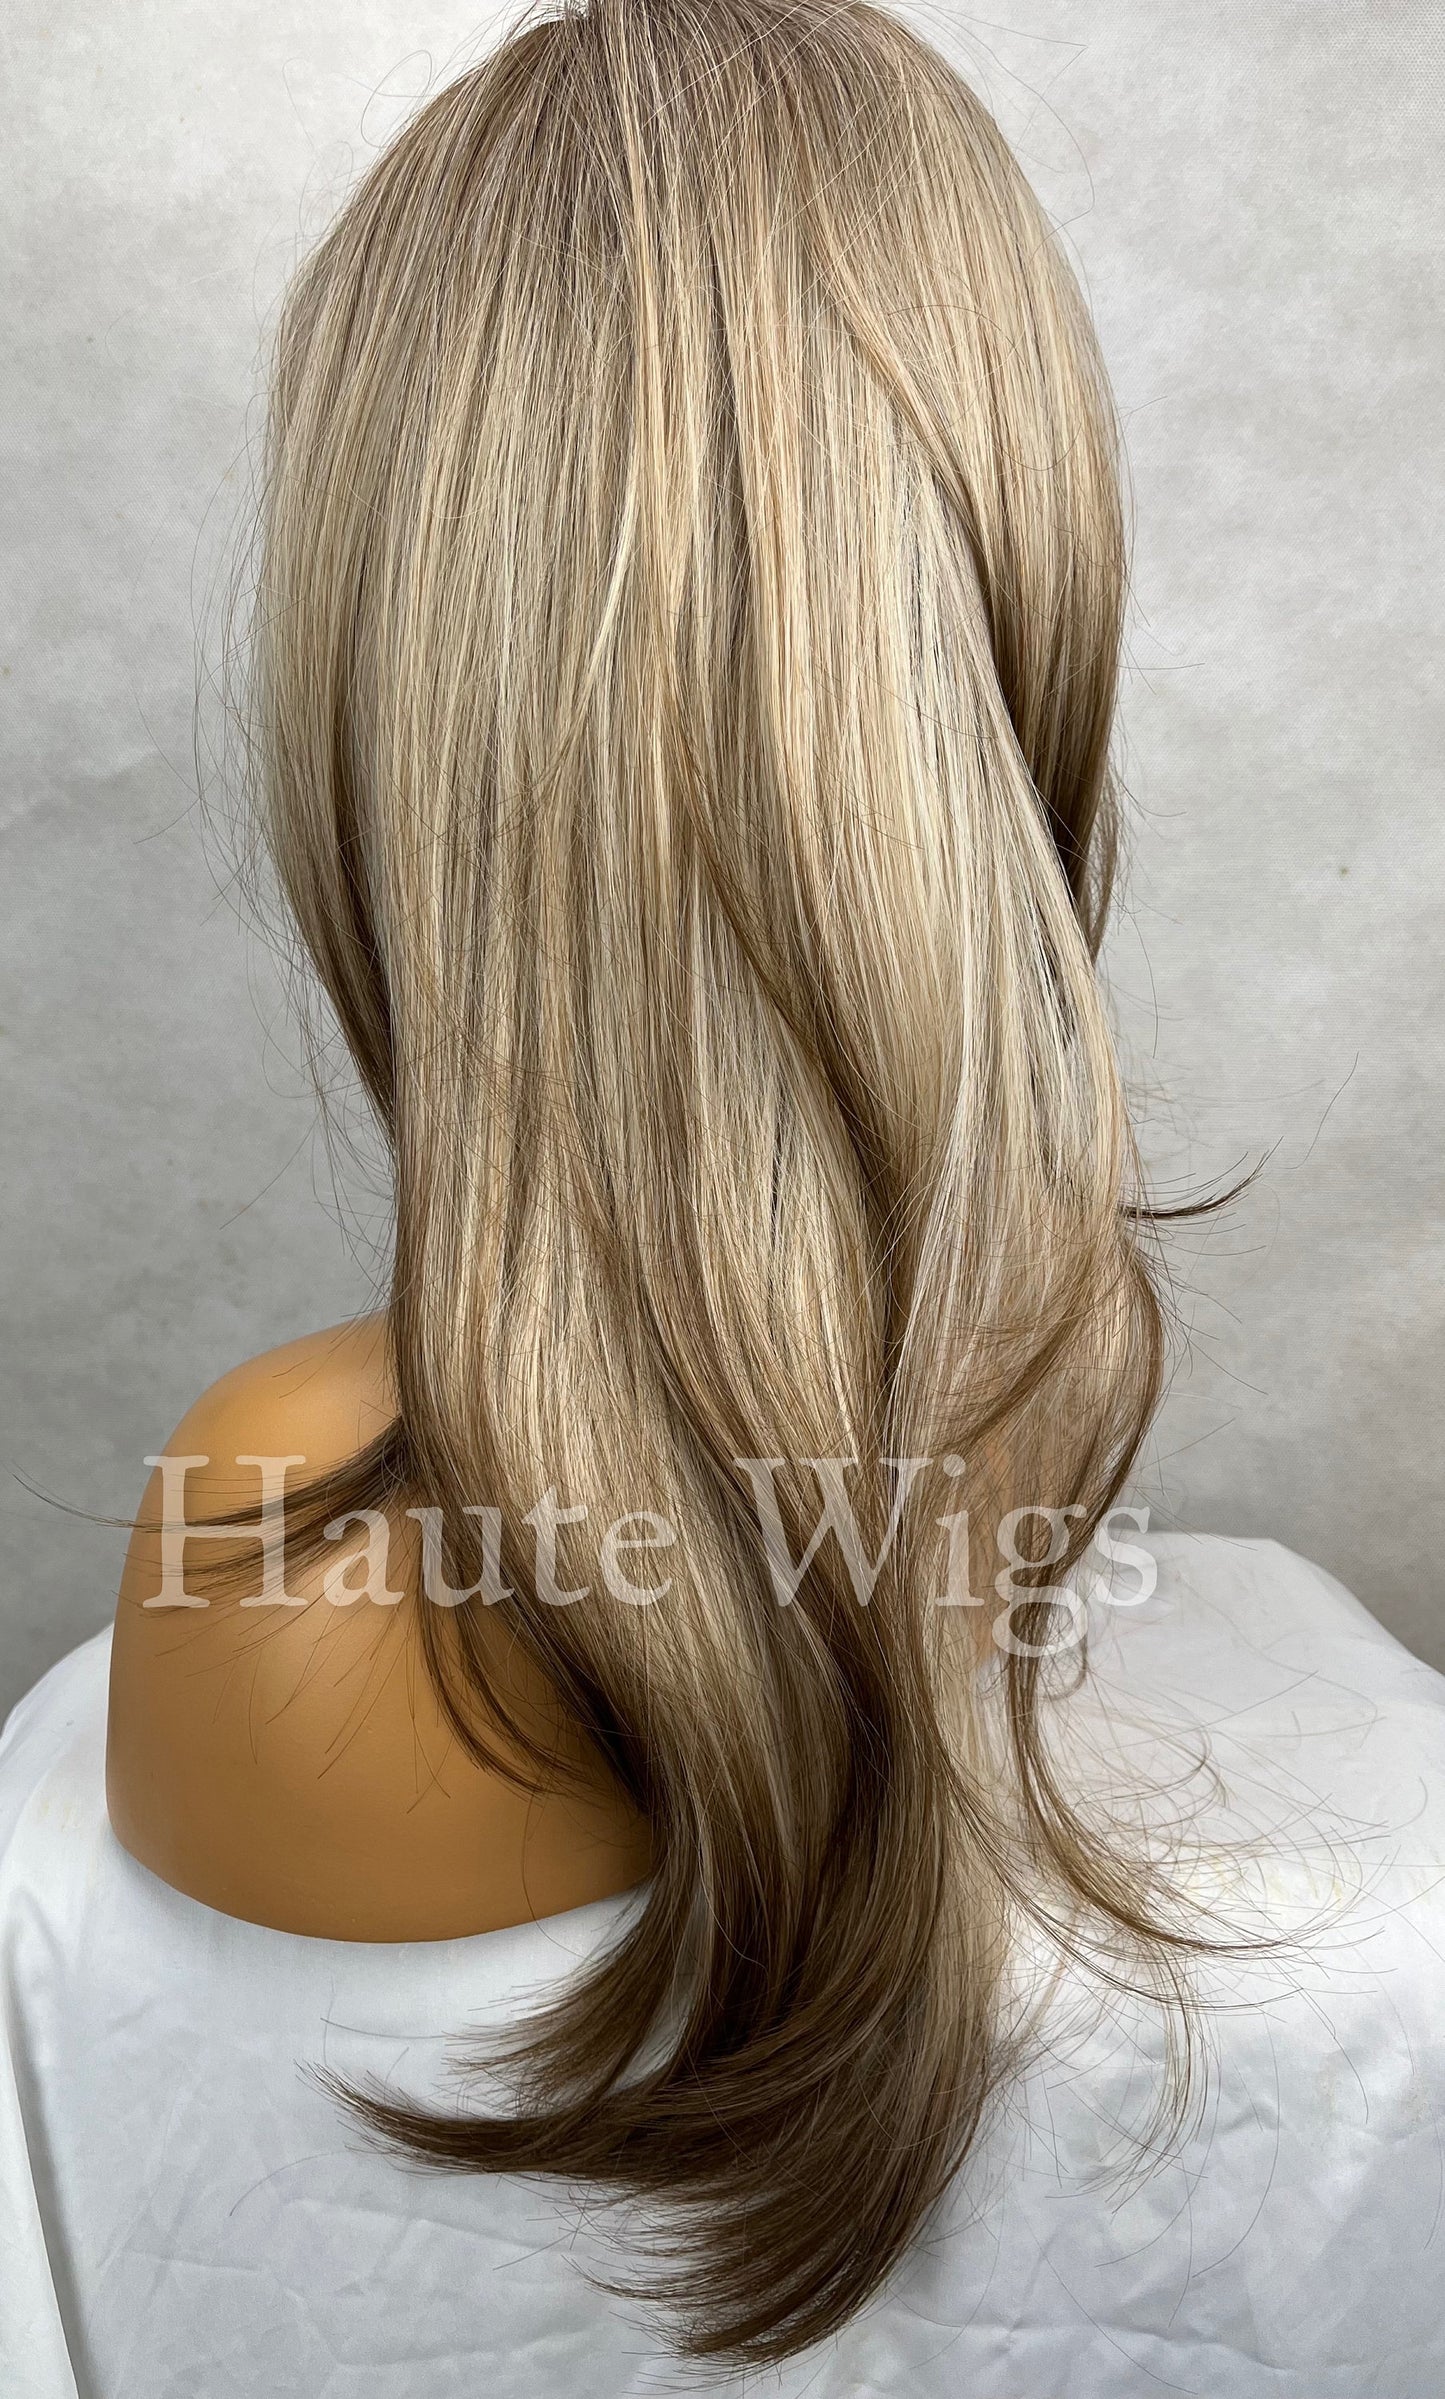 Chiffon -  Womens Honey Blonde to Brown Ombré Wig Dip dye Streaks highlights Bangs / Fringe Layered No Lace Front realistic haute Wigs gift